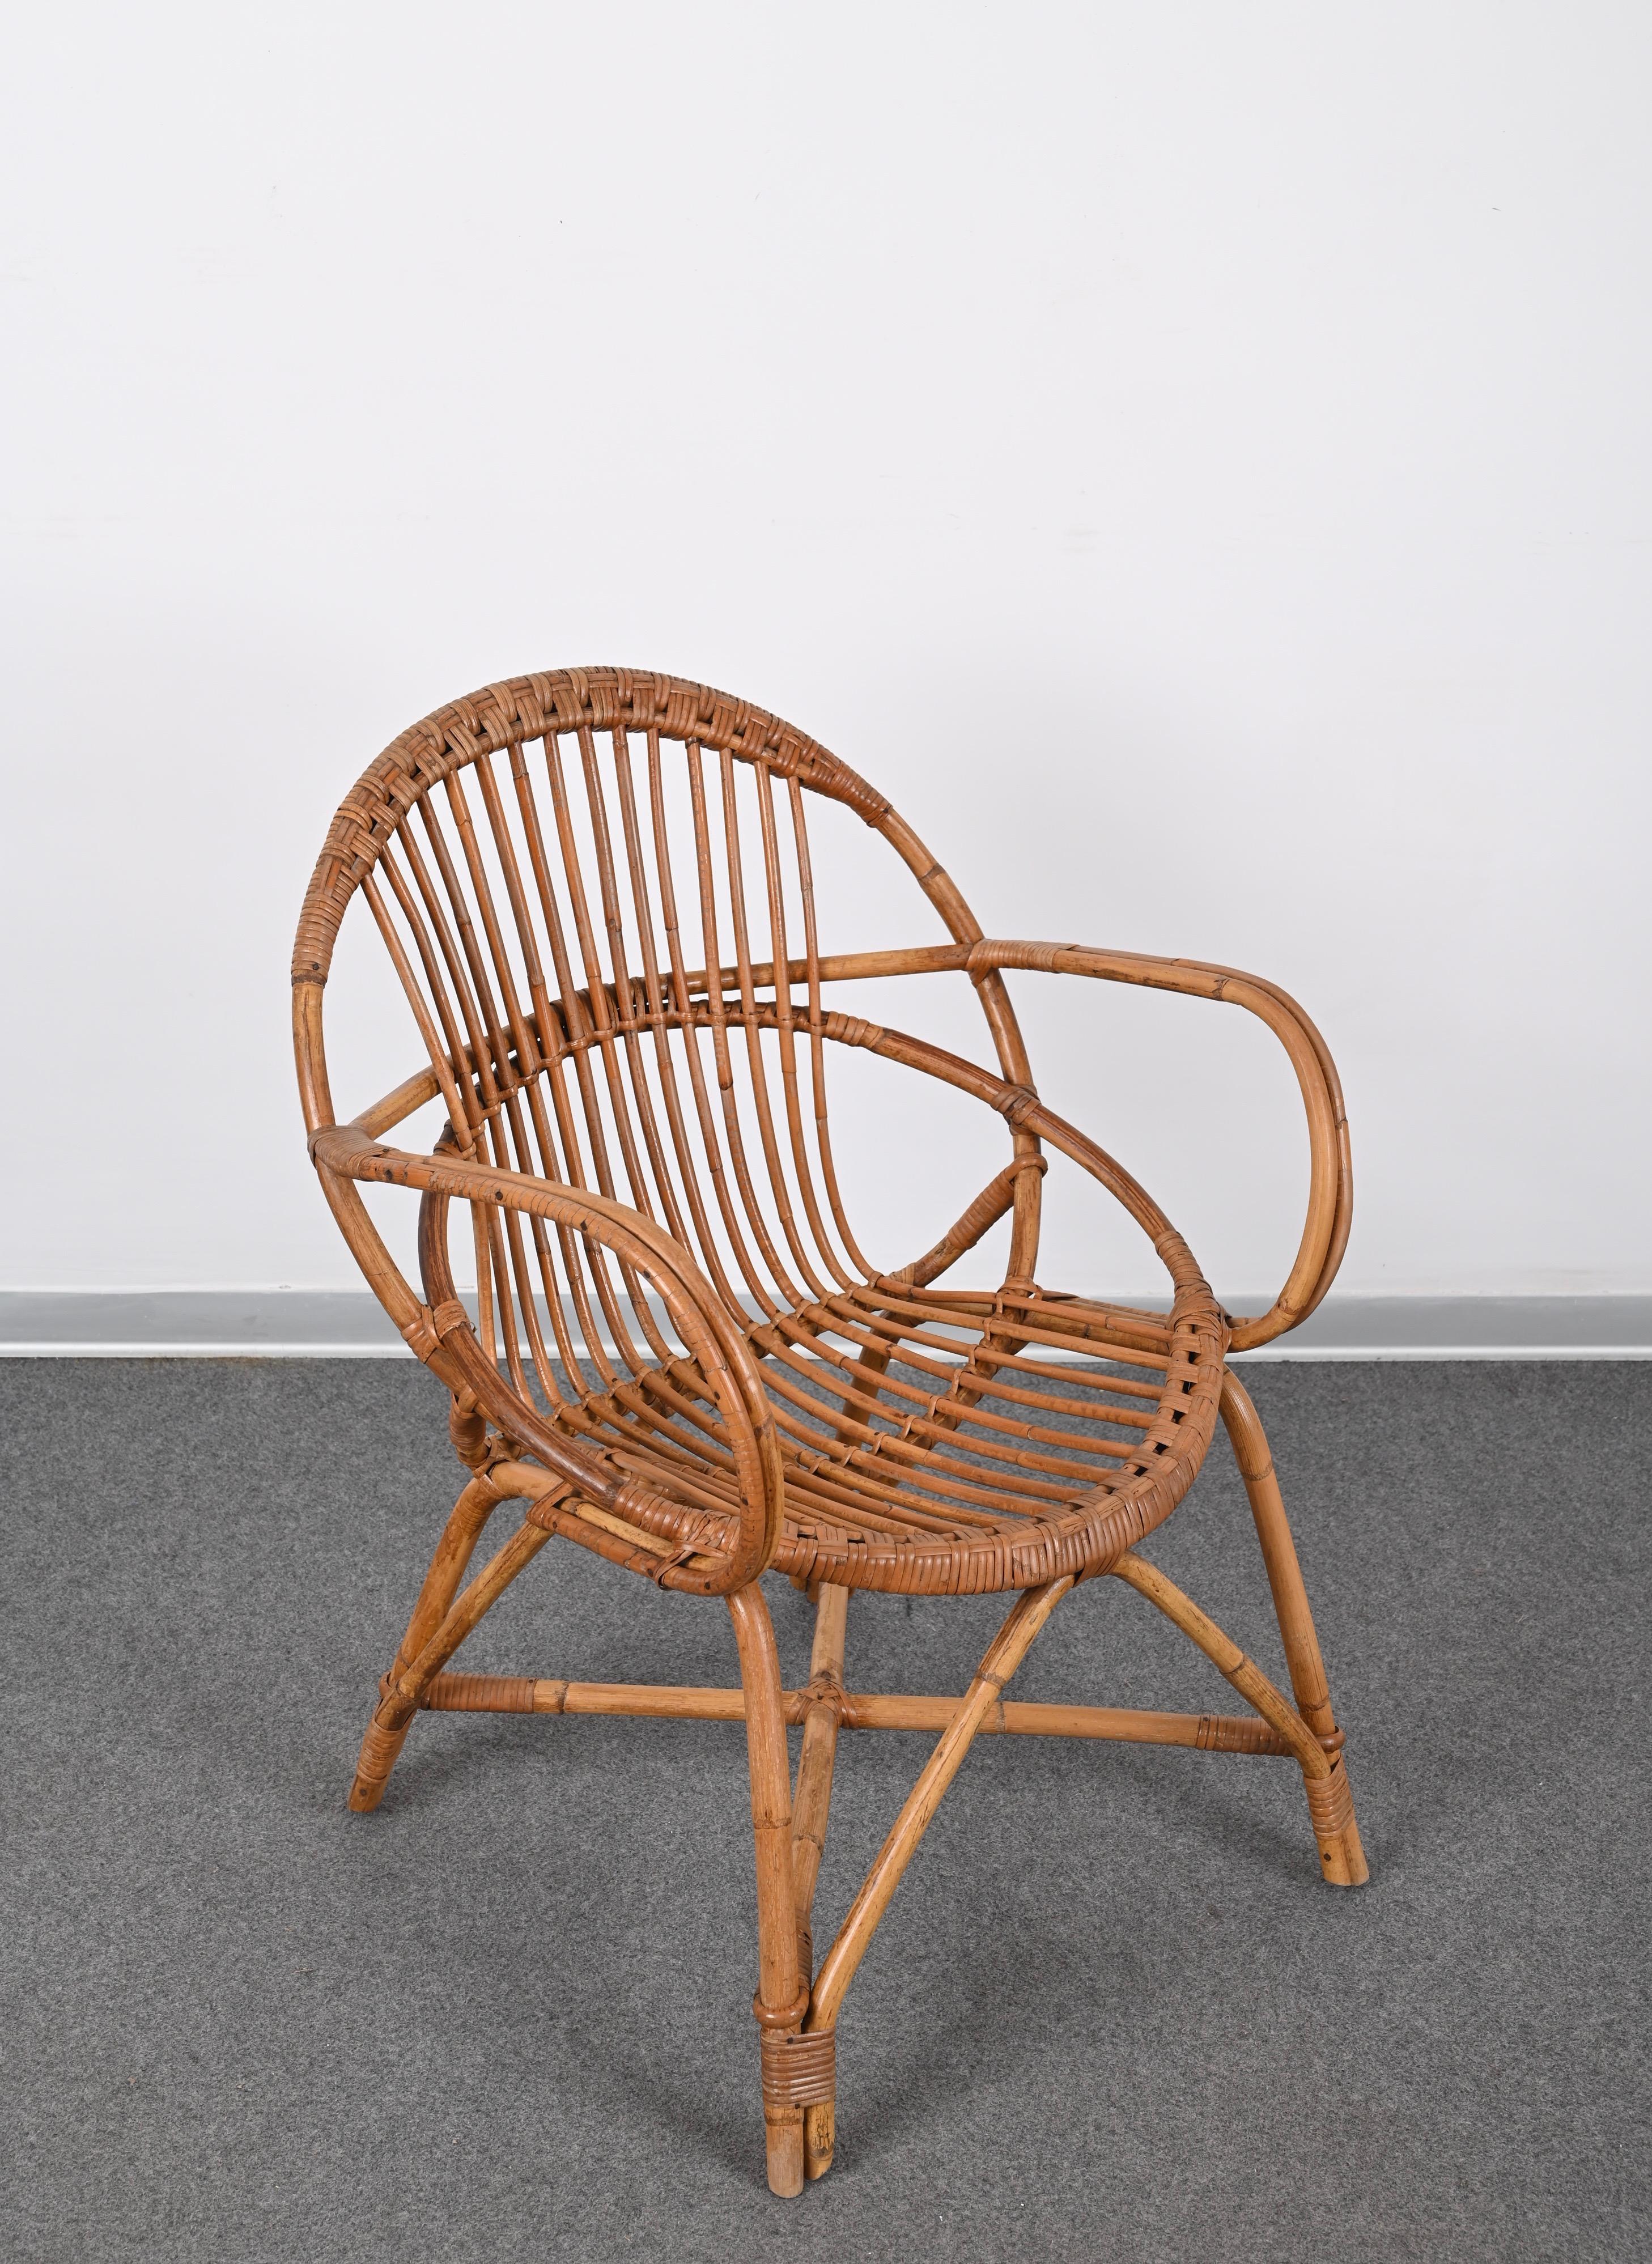 Midcentury Franco Albini Rattan and Bamboo Shell-Shaped Armchair, Italy, 1950s For Sale 4